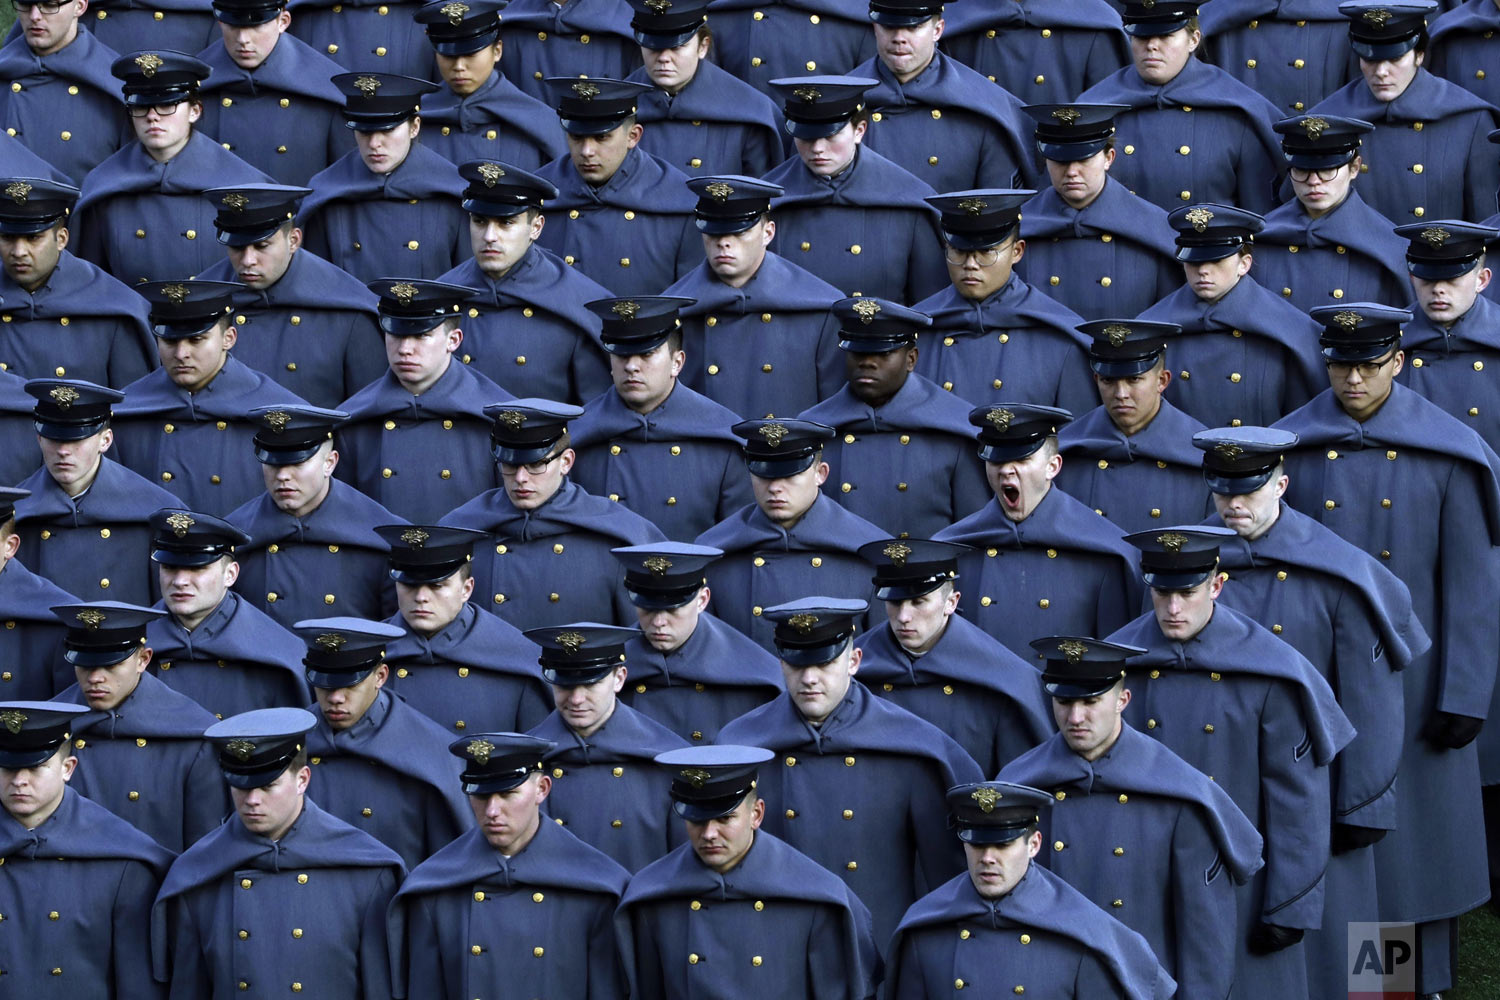  An Army cadet yawns after marching onto the field with others before an NCAA college football game against the Navy team in Philadelphia on Saturday, Dec. 8, 2018. (AP Photo/Matt Slocum) 